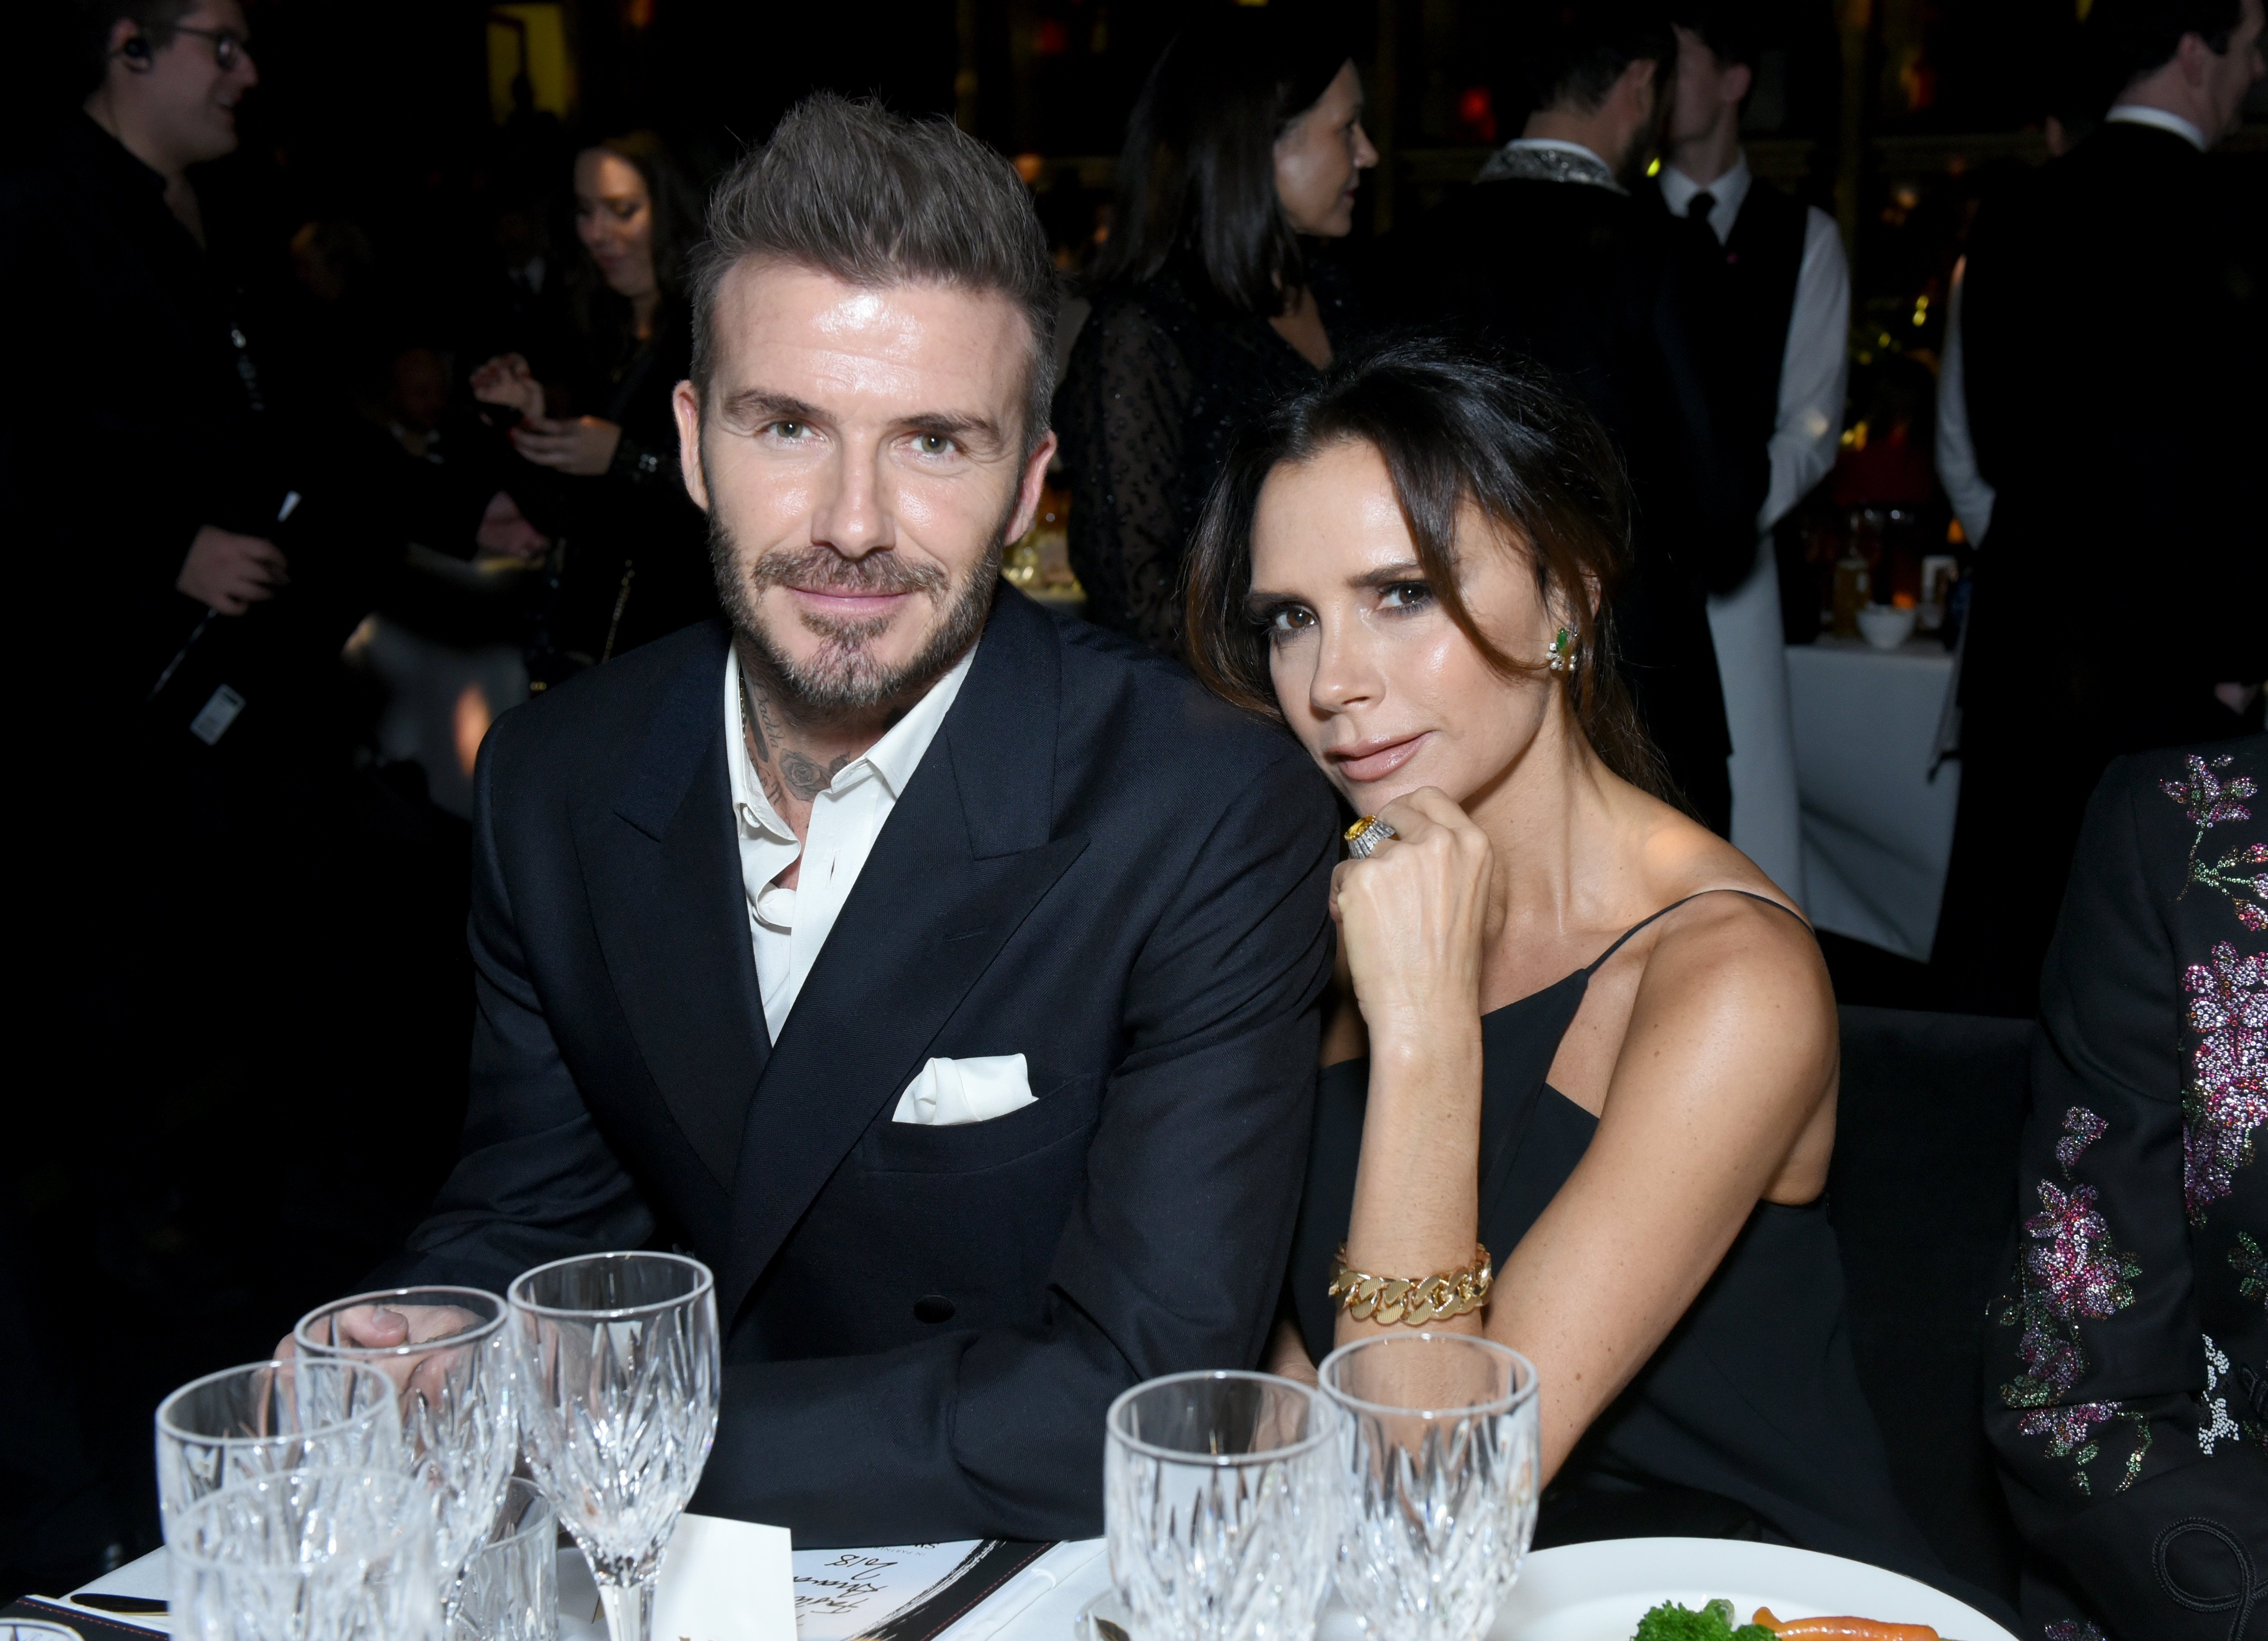 David Beckham and Victoria Beckham attend The Fashion Awards on December 10, 2018, in London, England. | Source: Getty Images.